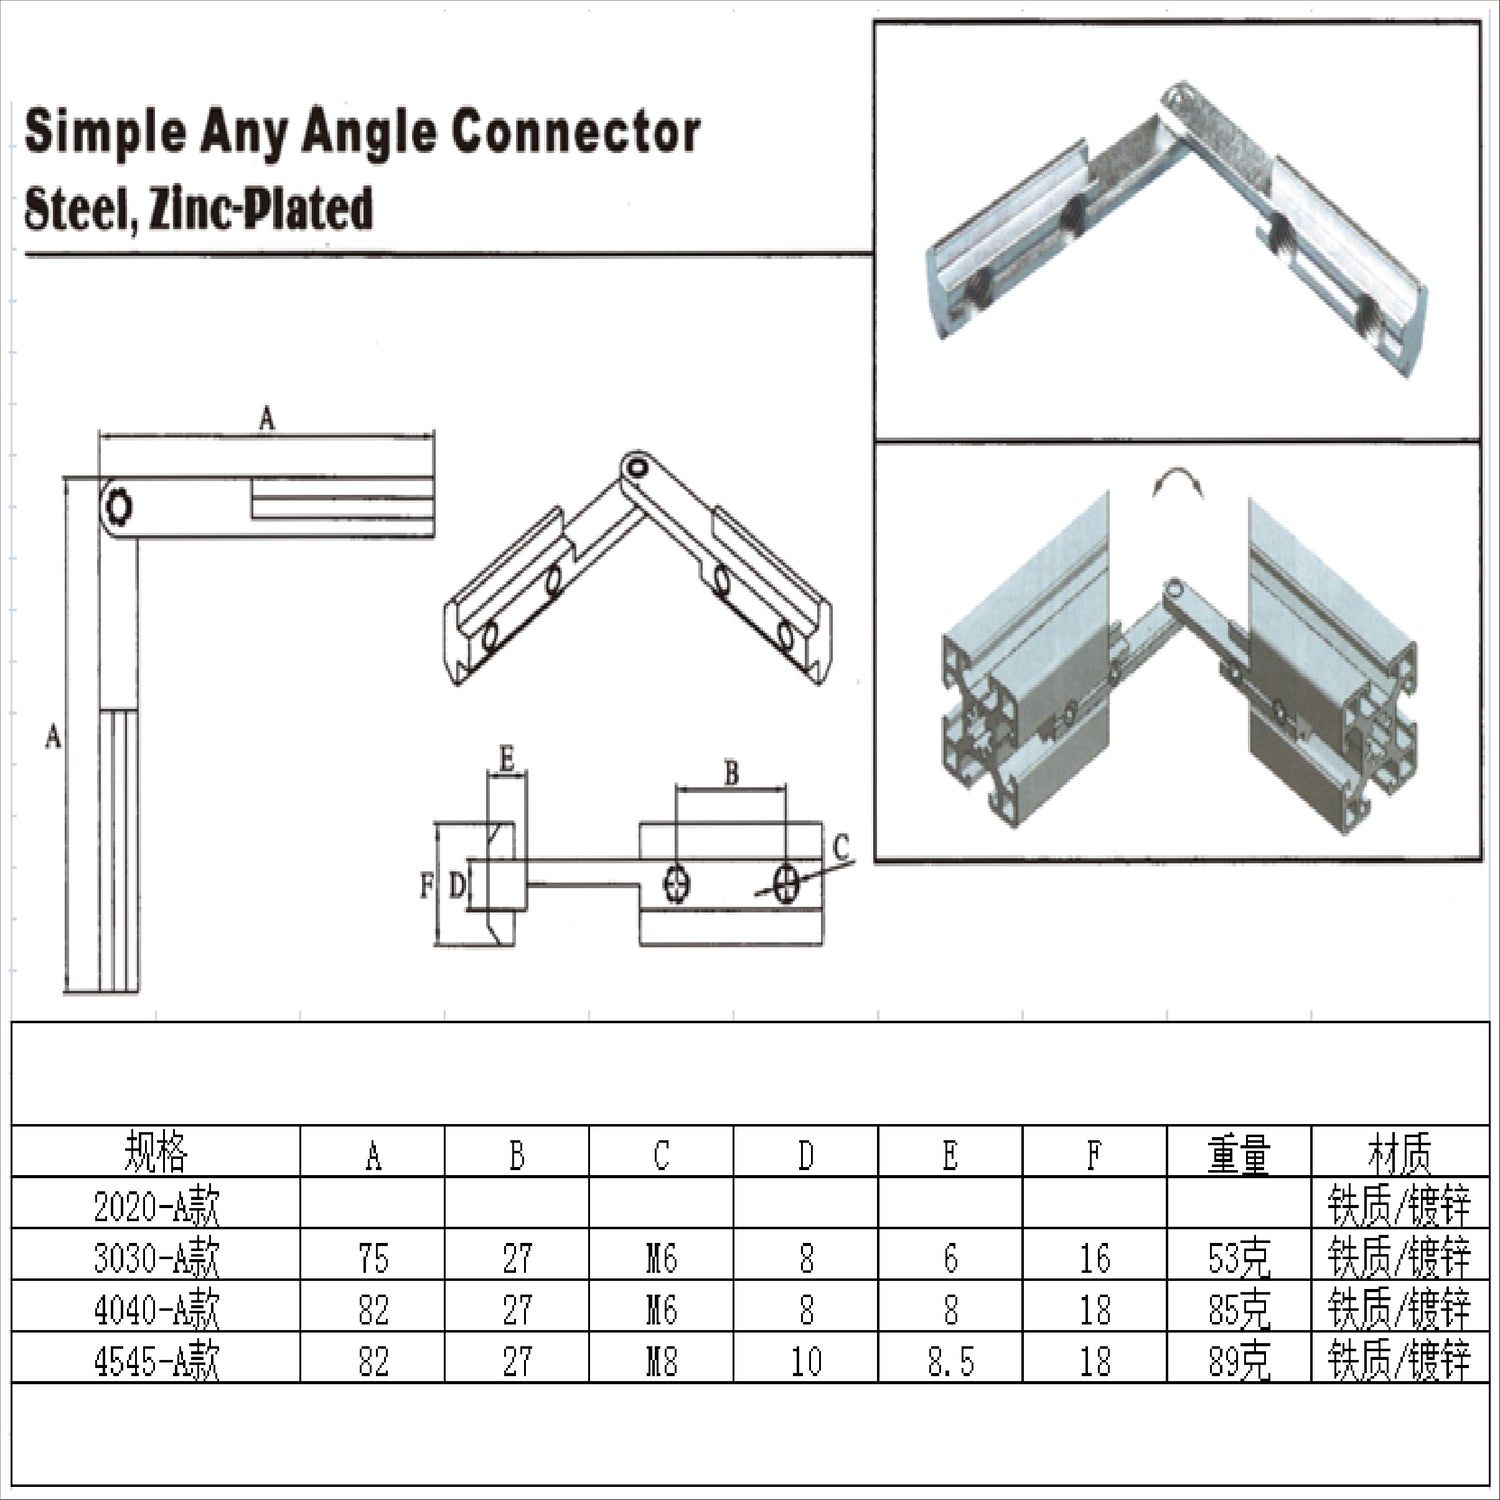 Simple Any Angle Connector  20 series type A